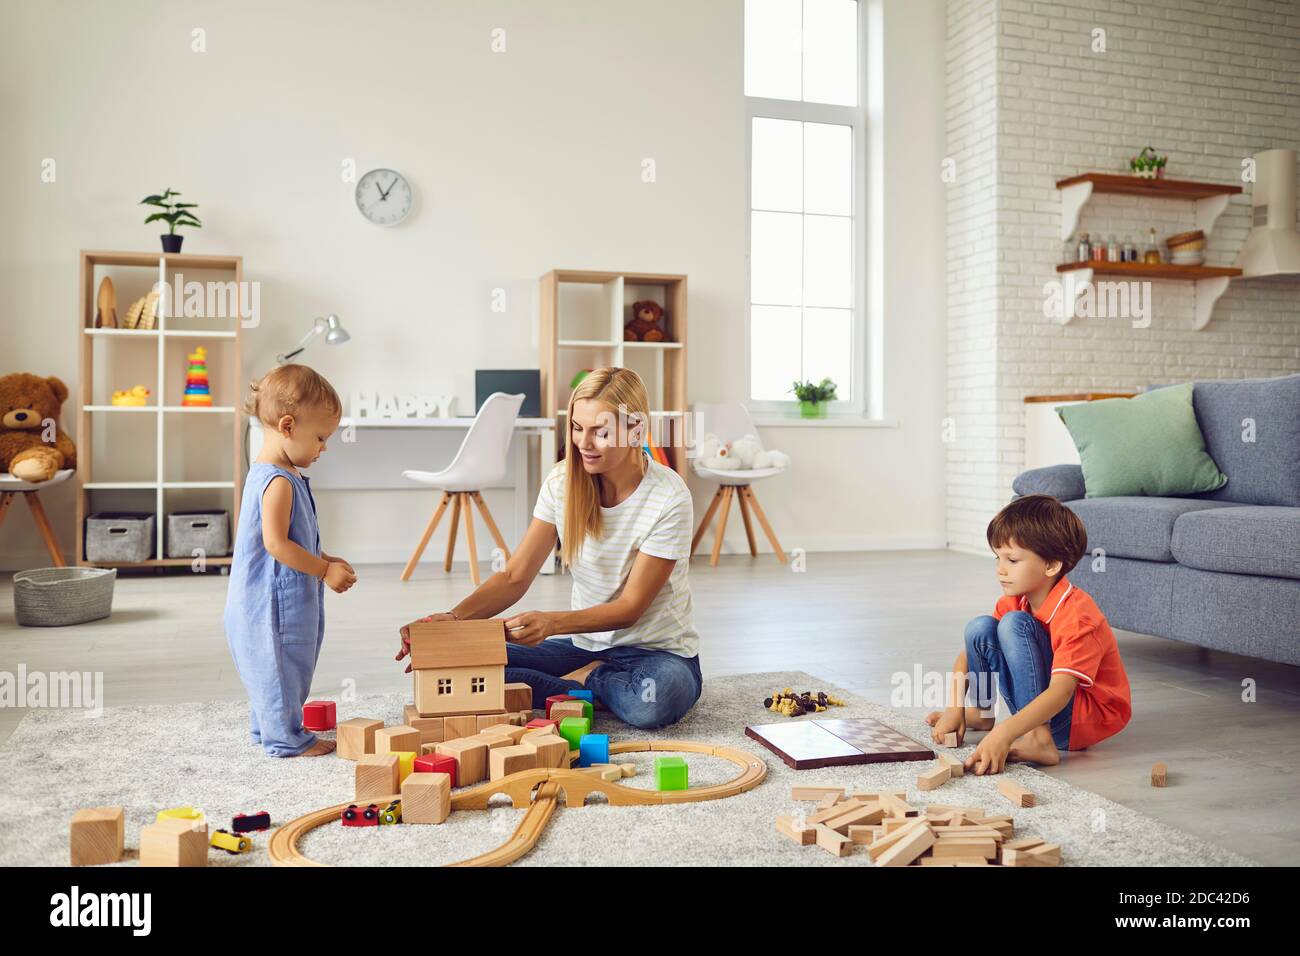 Mother playing educational games with smiling children on floor at home Stock Photo